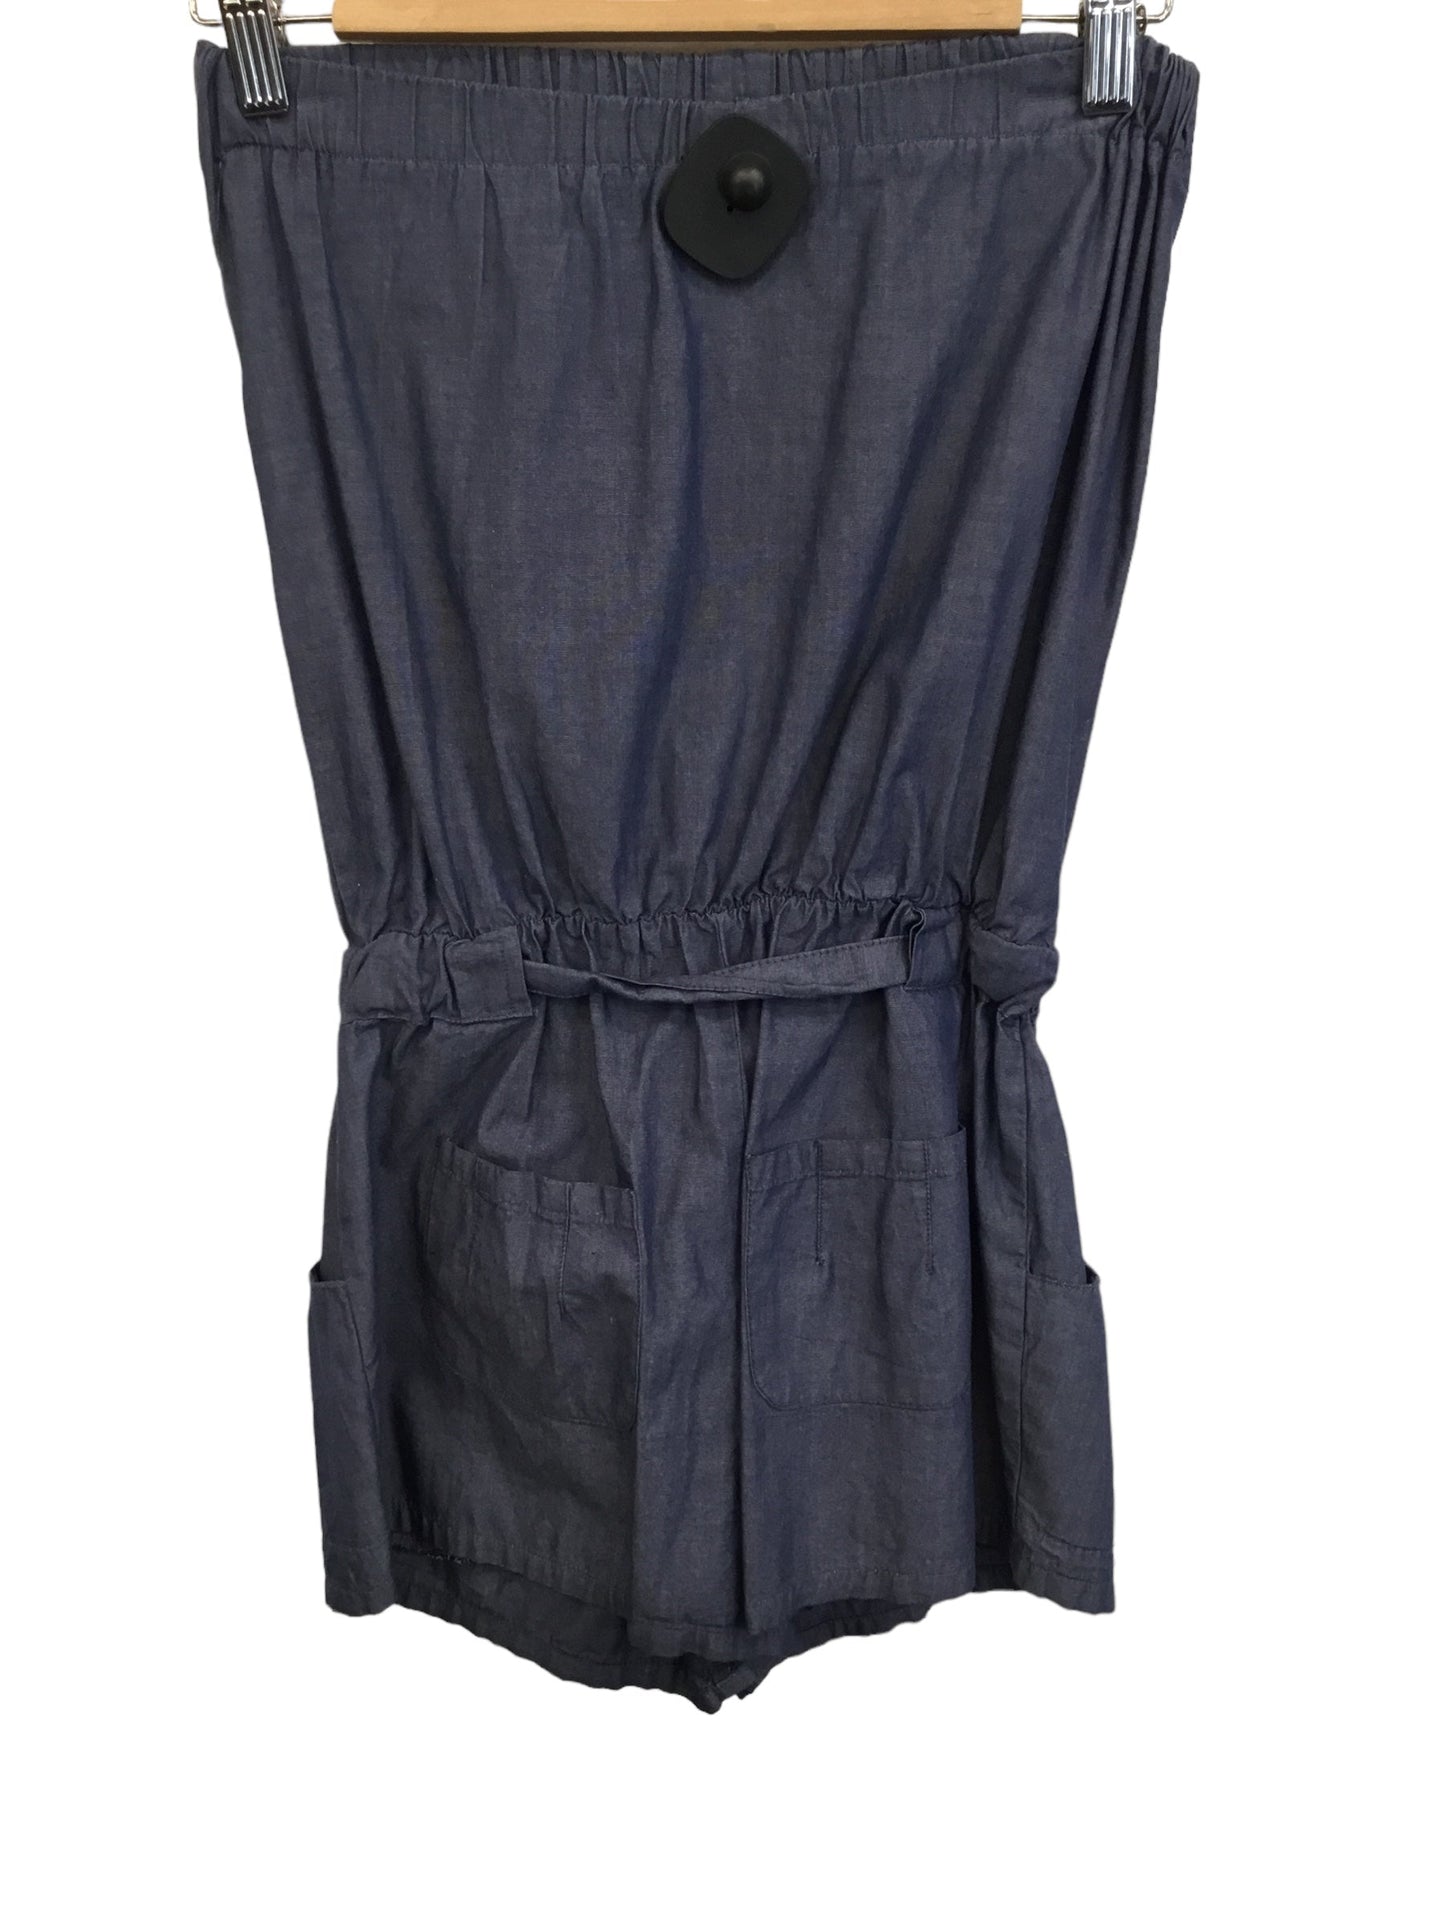 Romper By Mossimo  Size: Xs